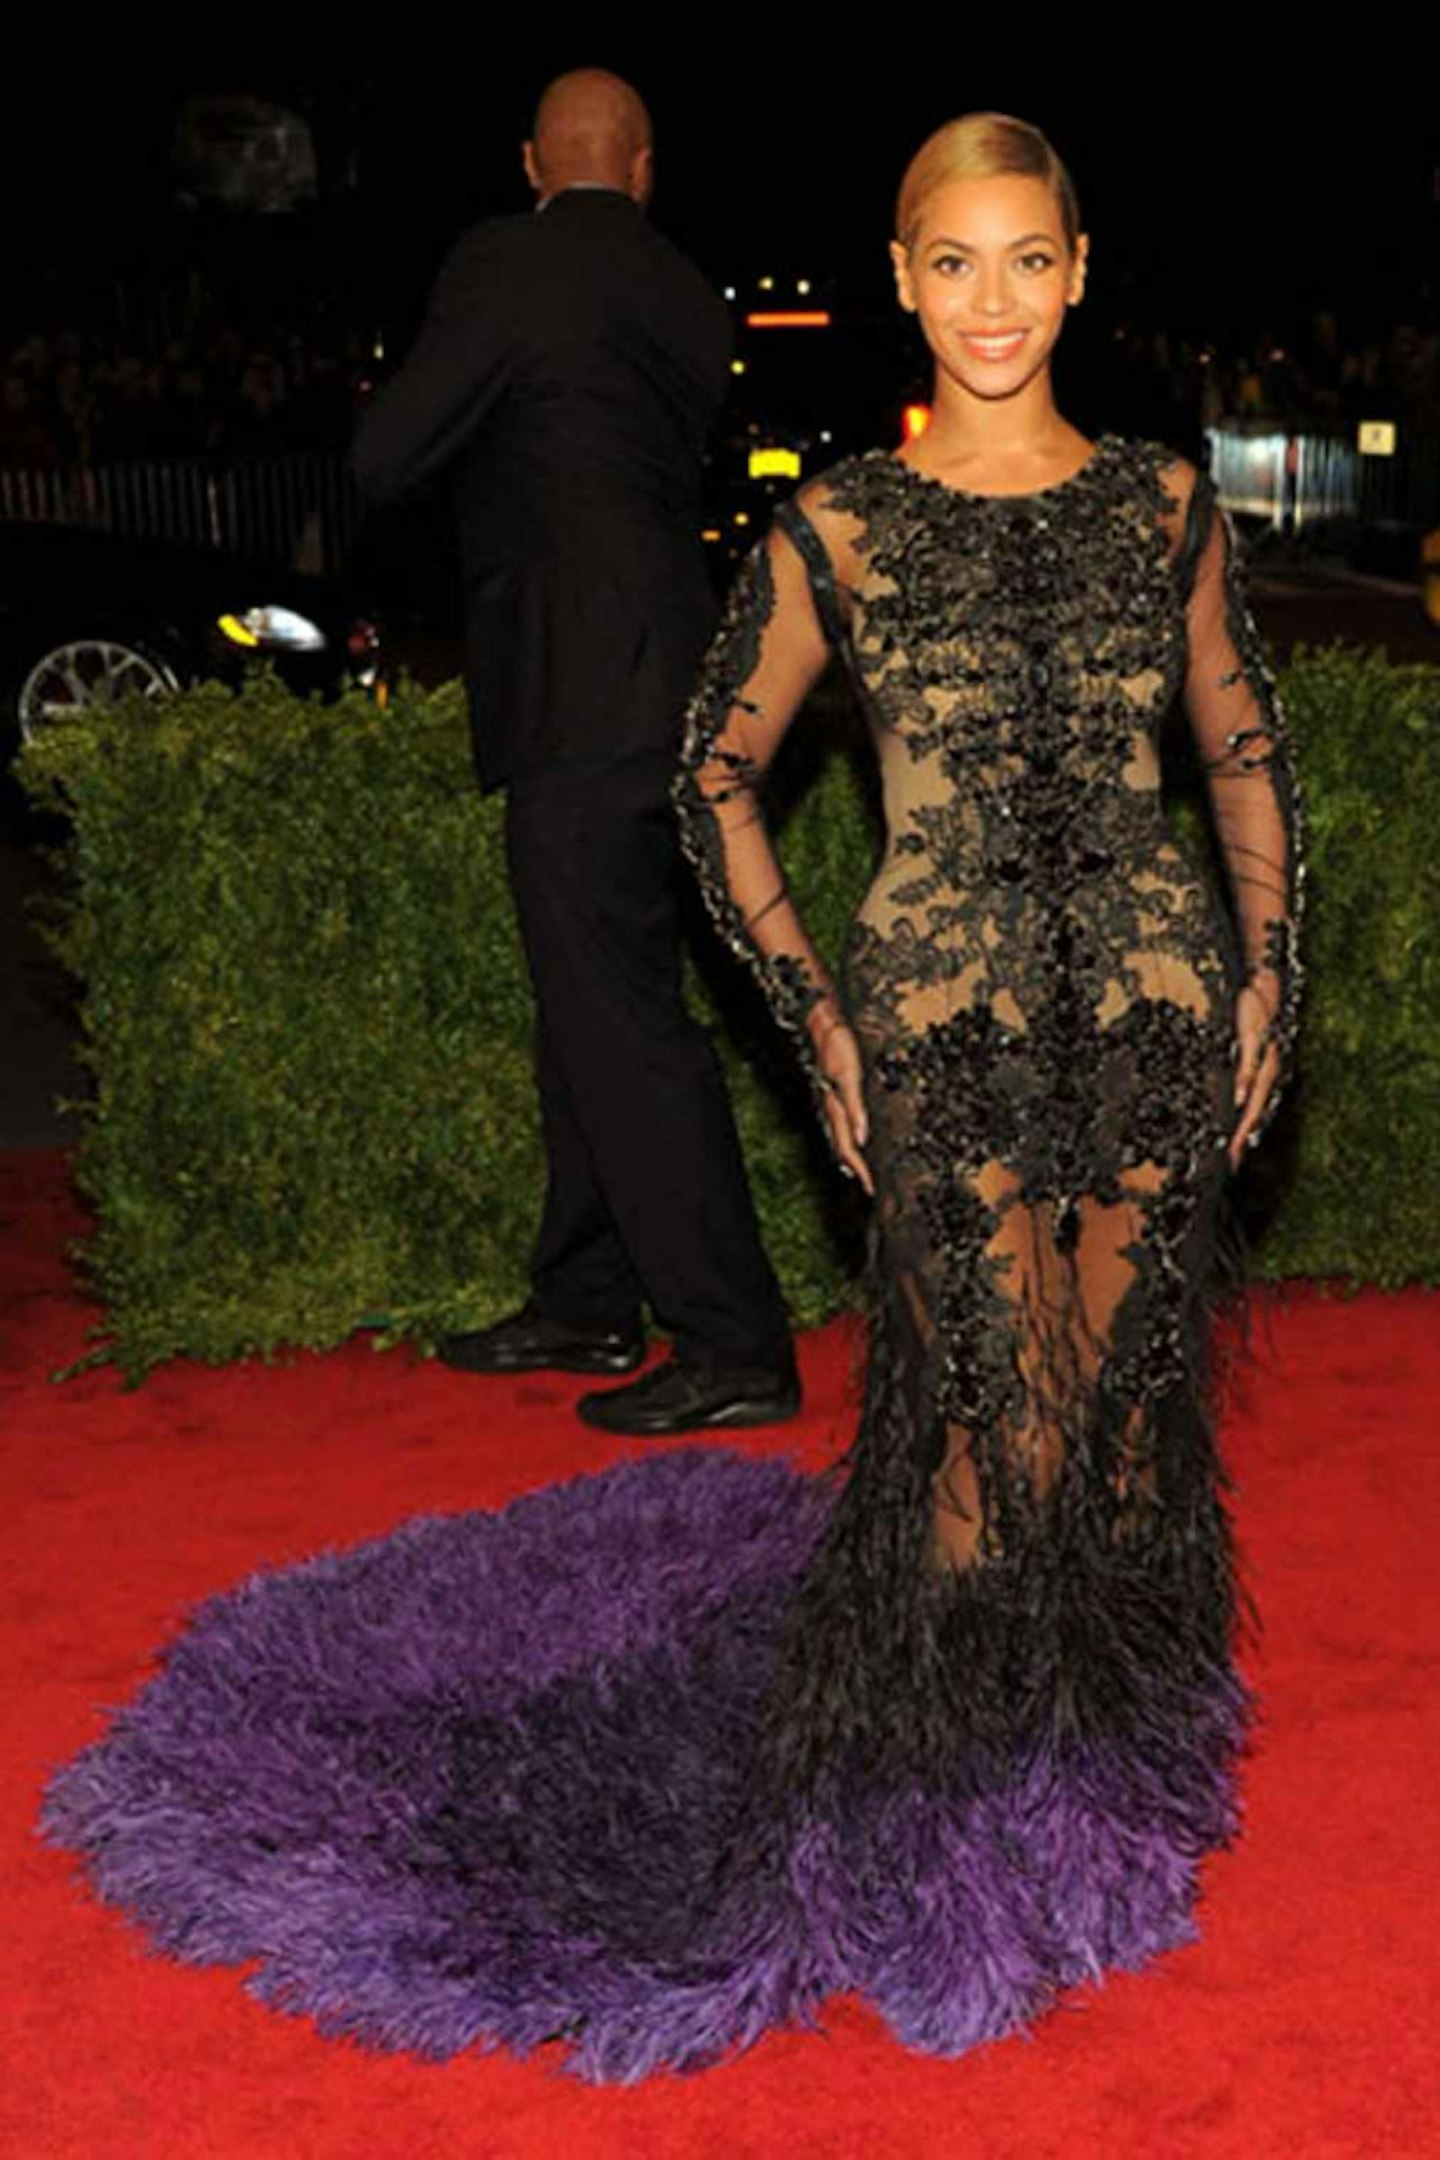 Beyonce style givenchy haute couture ruffle black purple dress